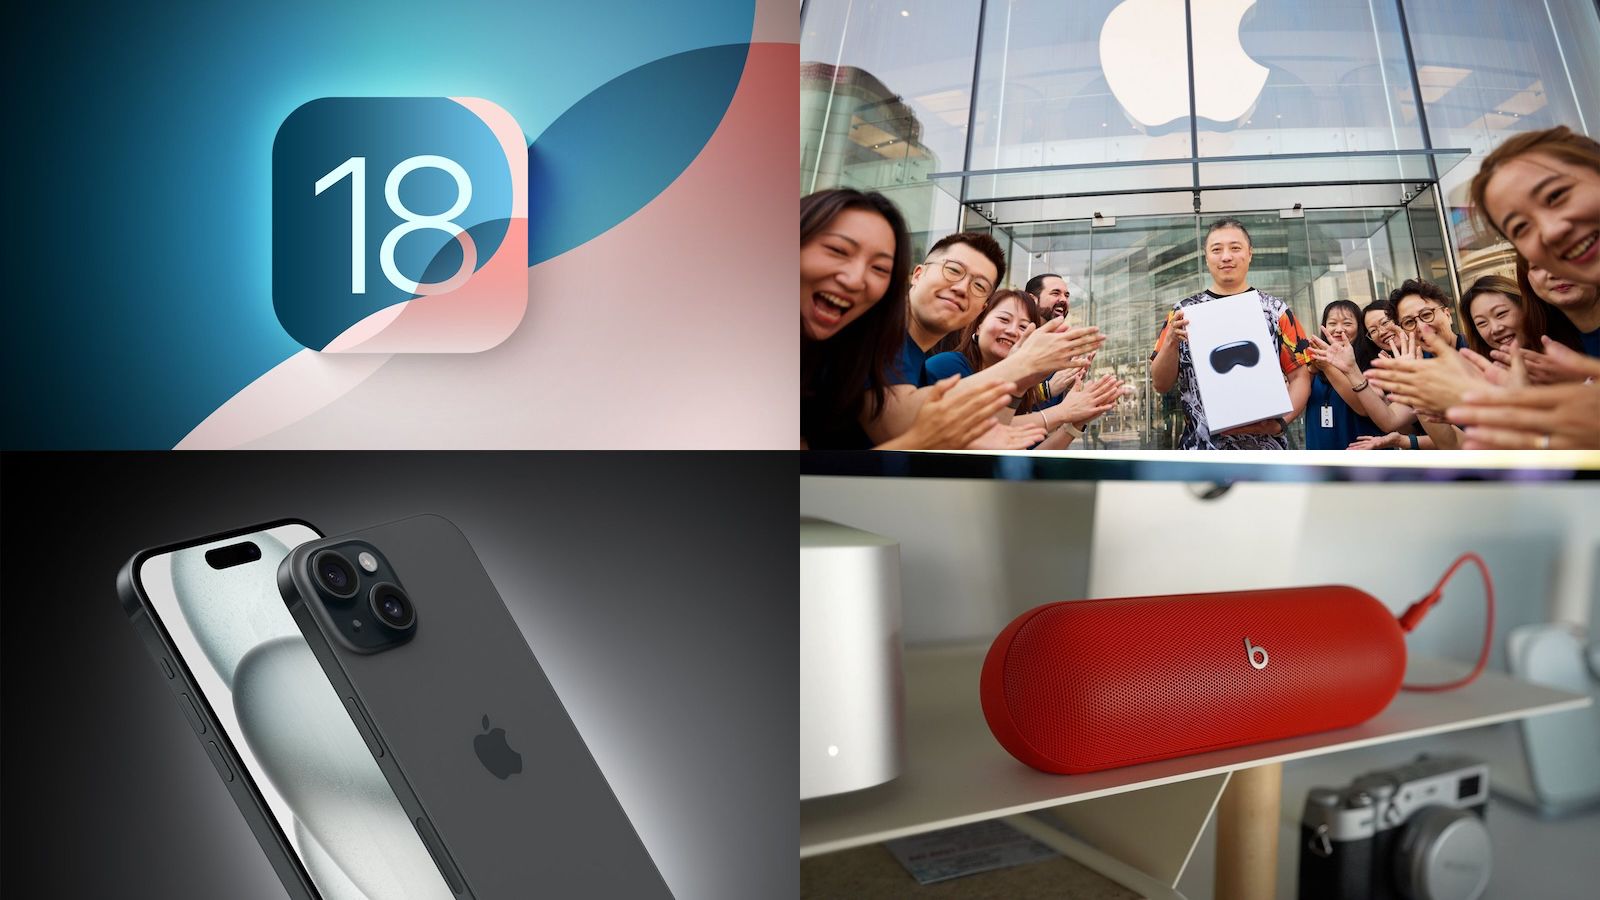 Prime Tales: iOS 18 Beta 2, Apple Imaginative and prescient Professional Worldwide Launch, New Beats Speaker, and Extra